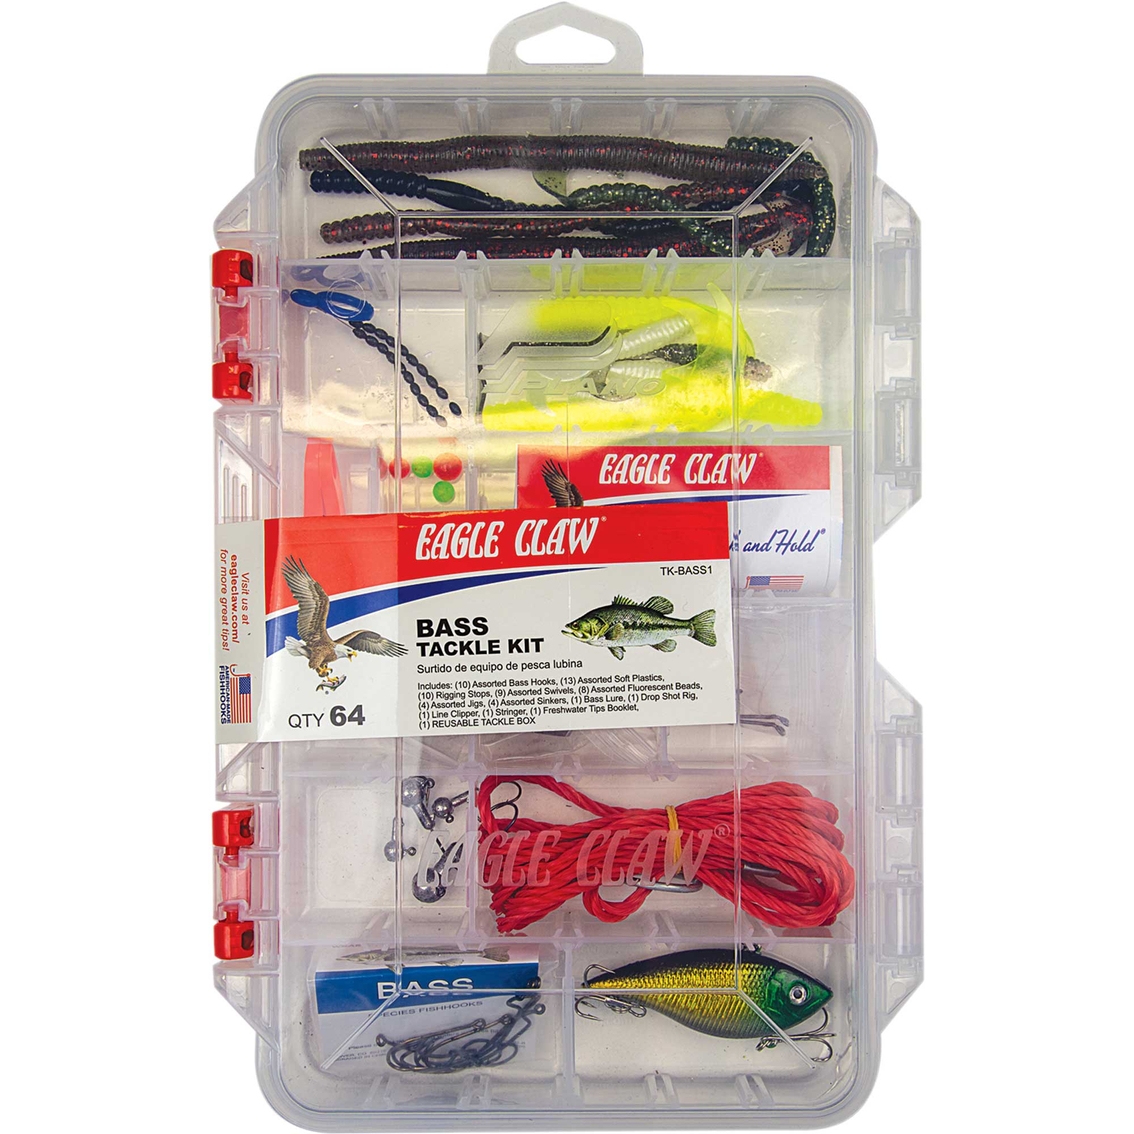 Eagle Claw 55 Pc. Bass Tackle Kit, Fishing Accessories